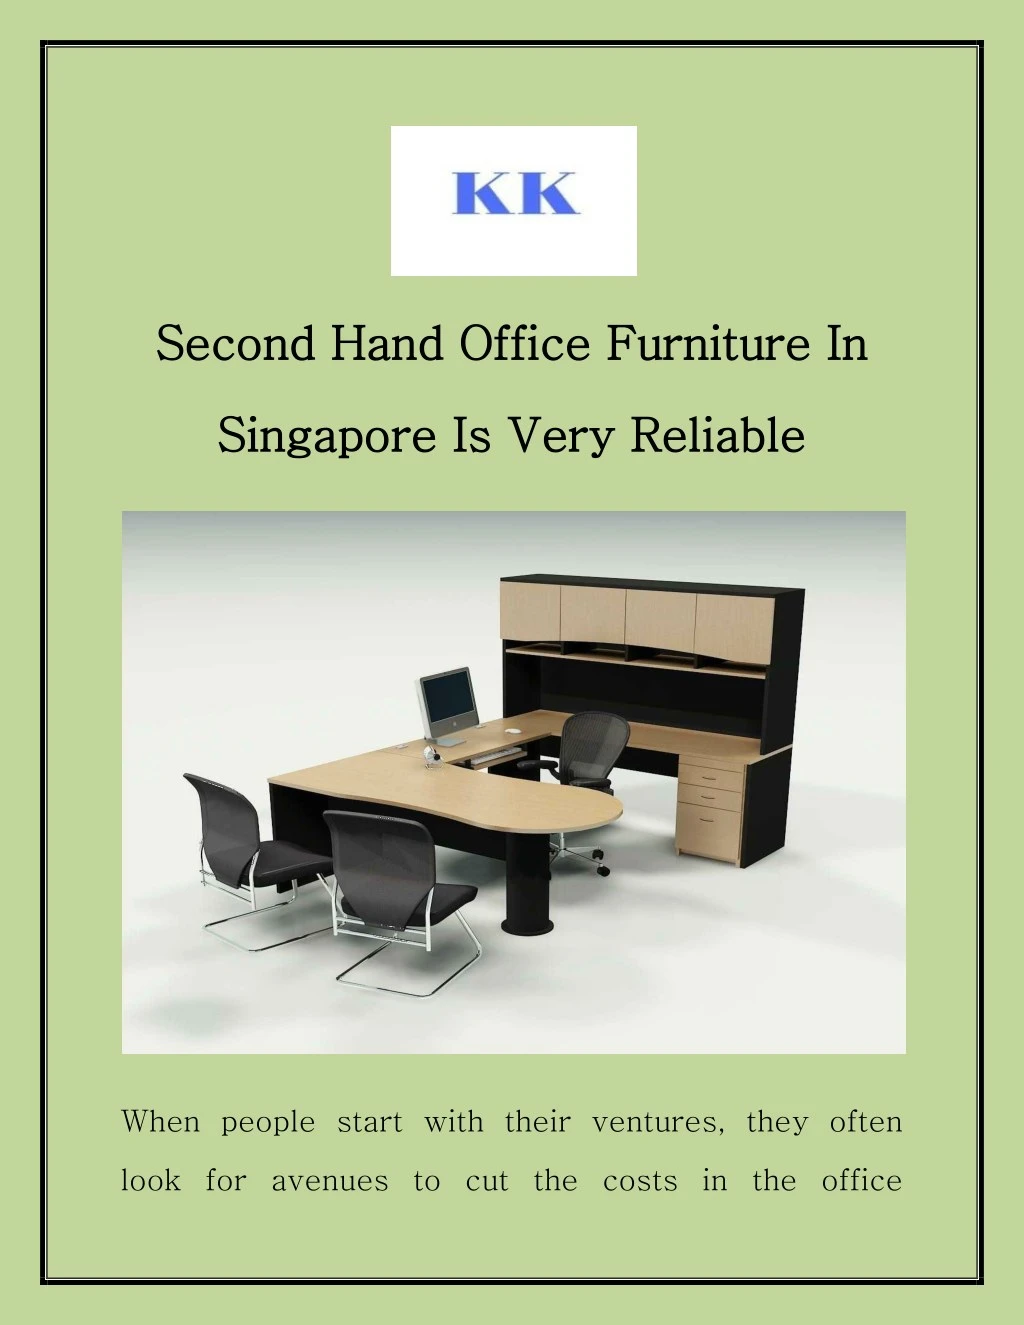 second hand office furniture in second hand